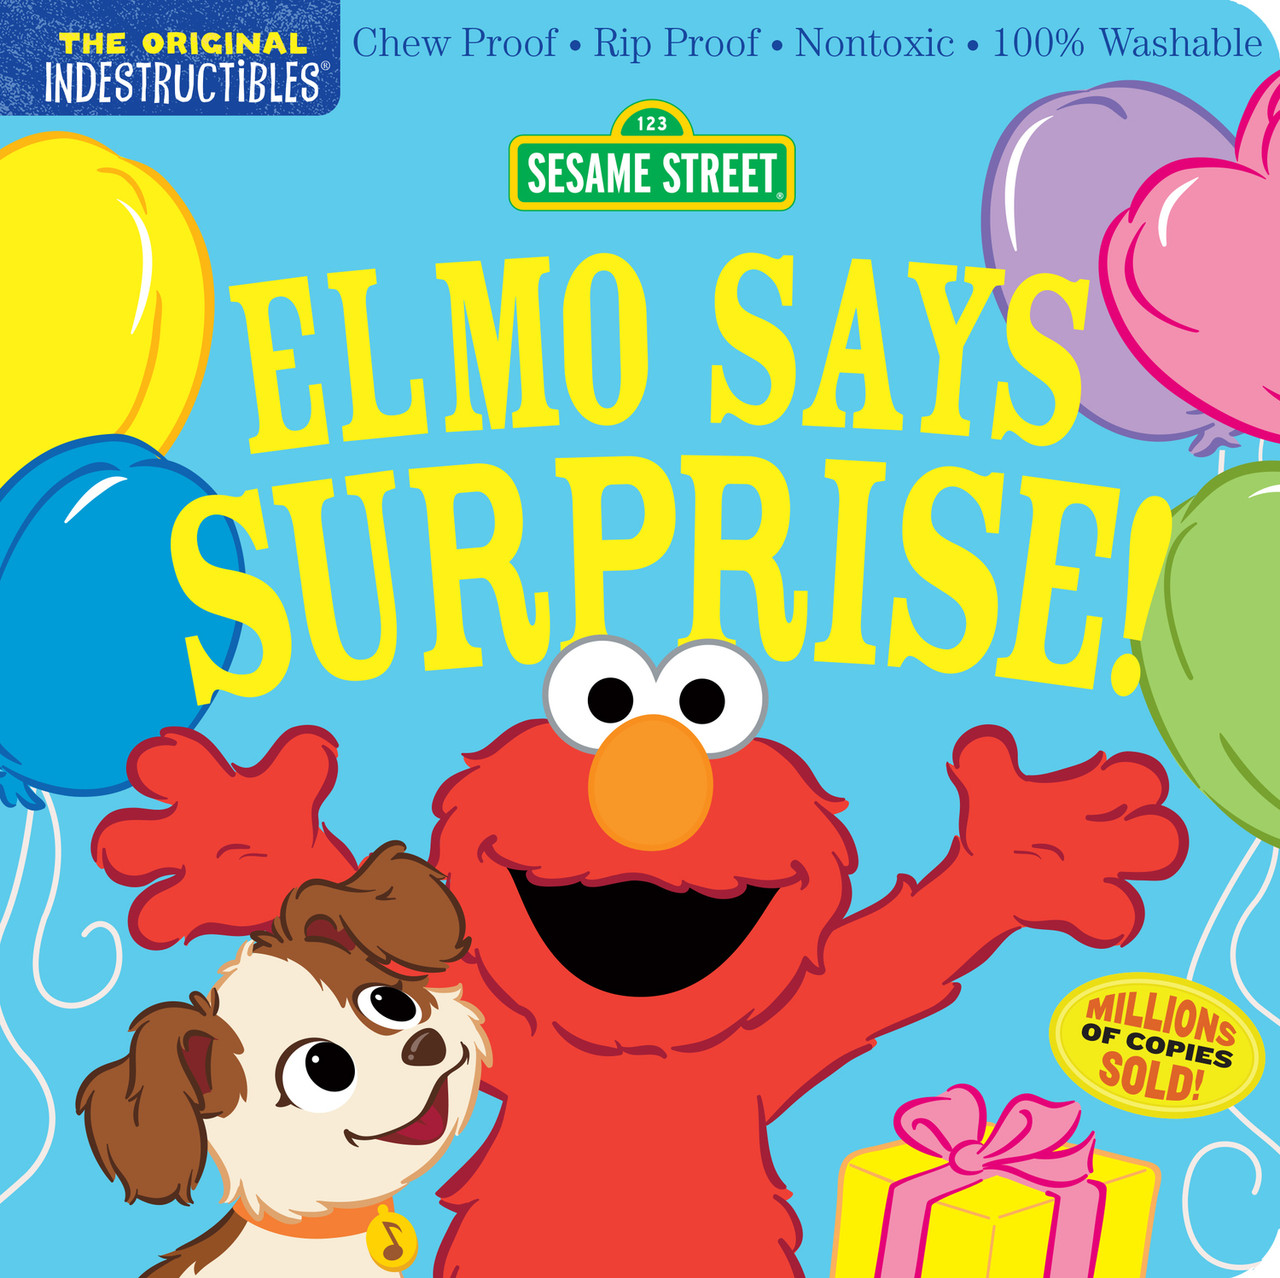 Indestructibles: Sesame Street: Elmo Says Surprise!: Chew Proof · Rip Proof · Nontoxic · 100% Washable (Book for Babies, Newborn Books, Safe to Chew) 1